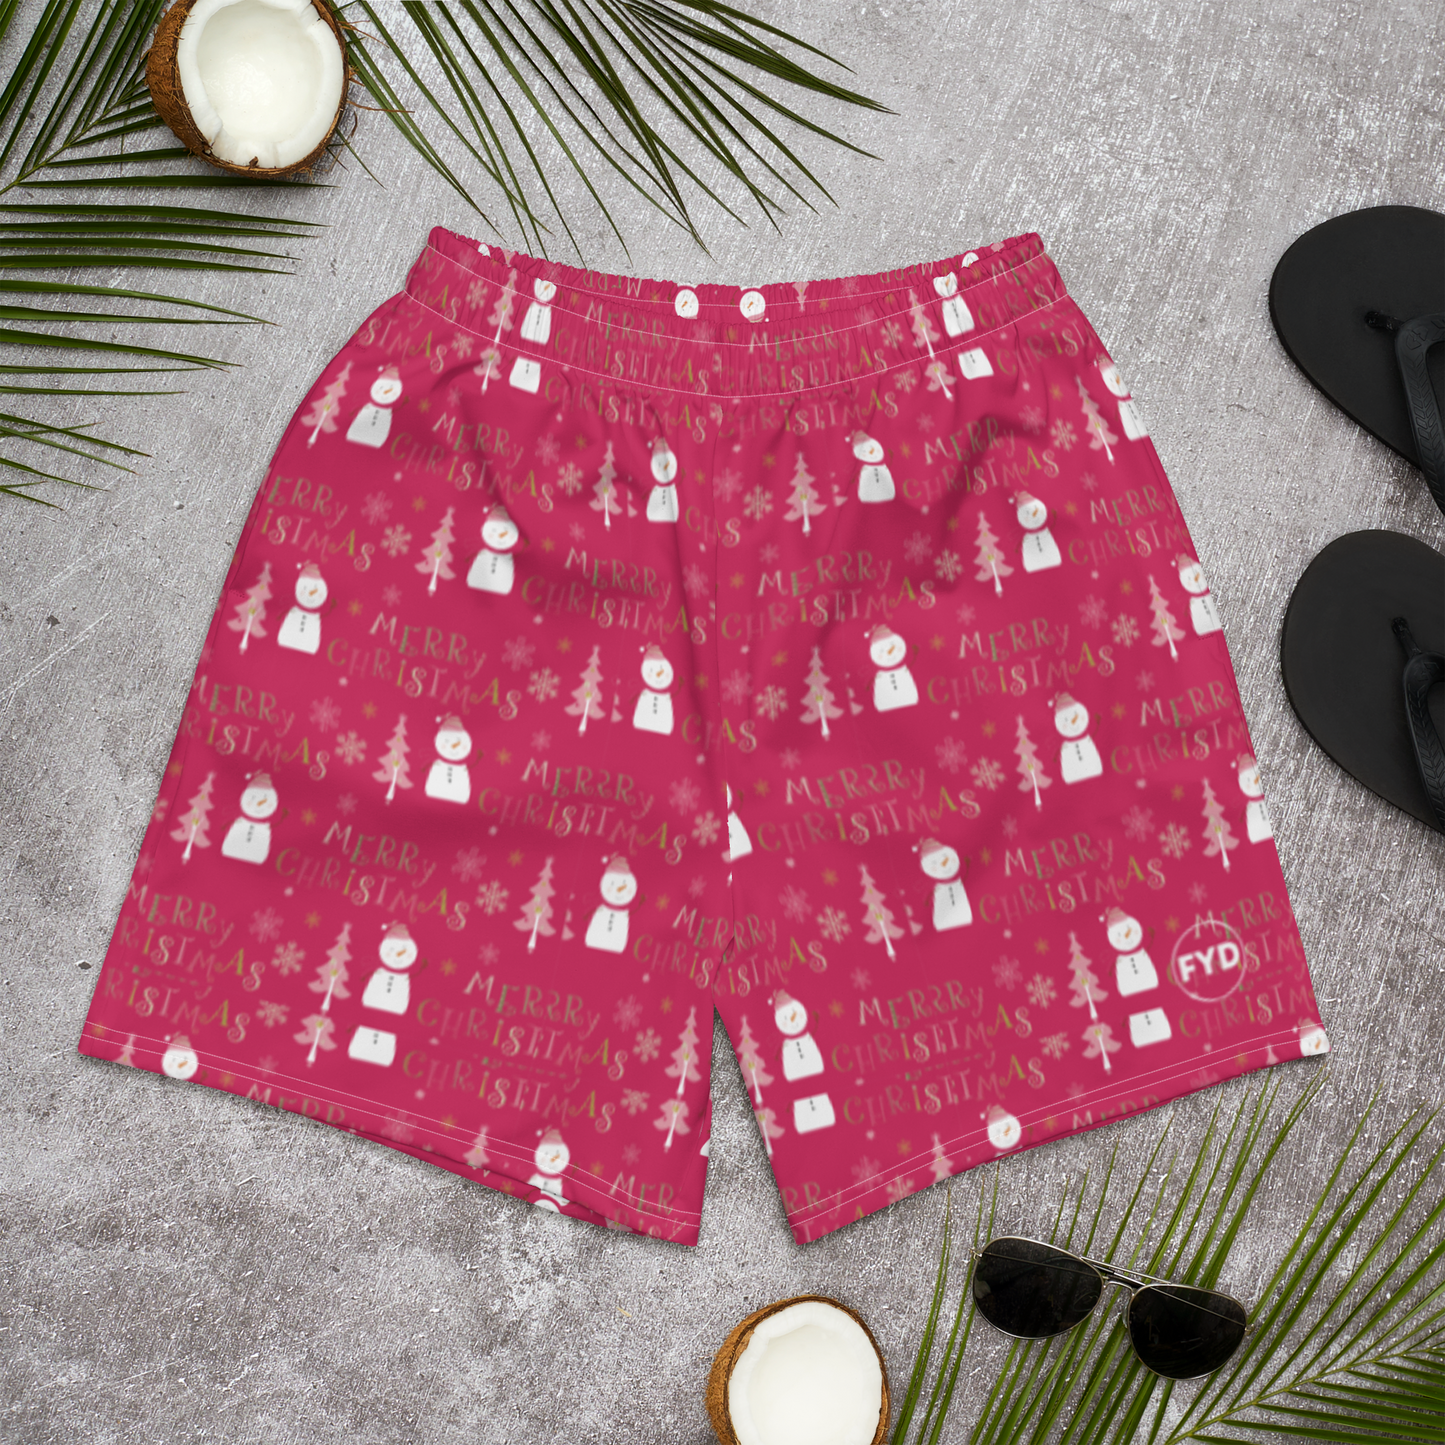 Unisex Athleisure Shorts in xmas print - familiar...yet different